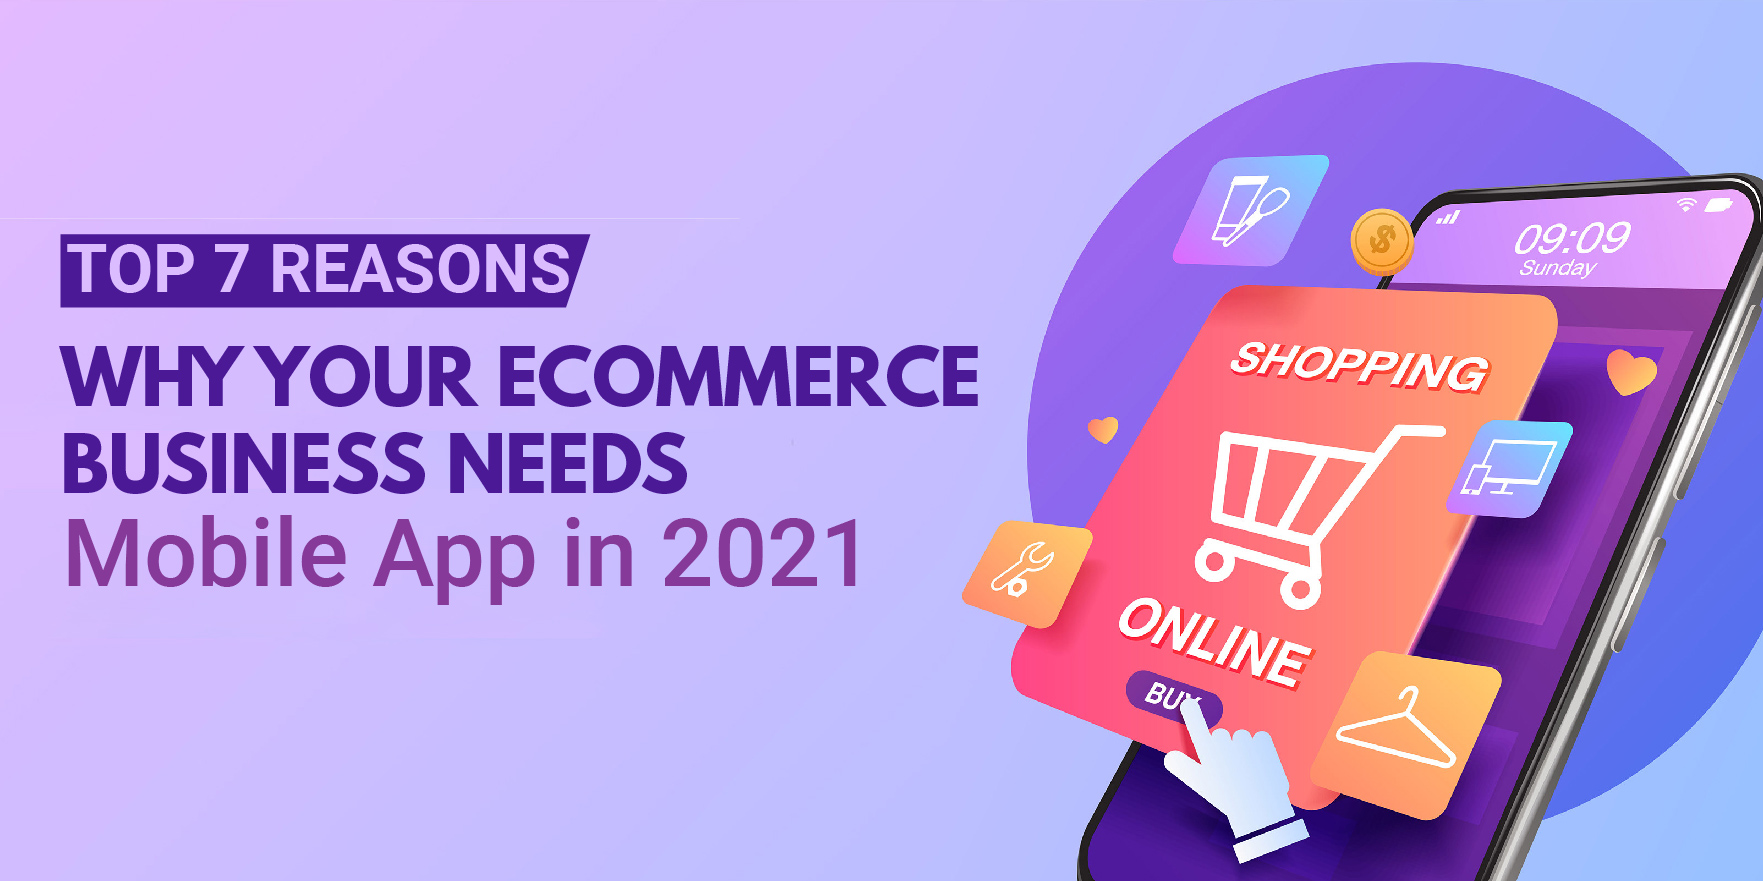 Top 7 Reasons Why Your eCommerce Business Needs Mobile App in 2022